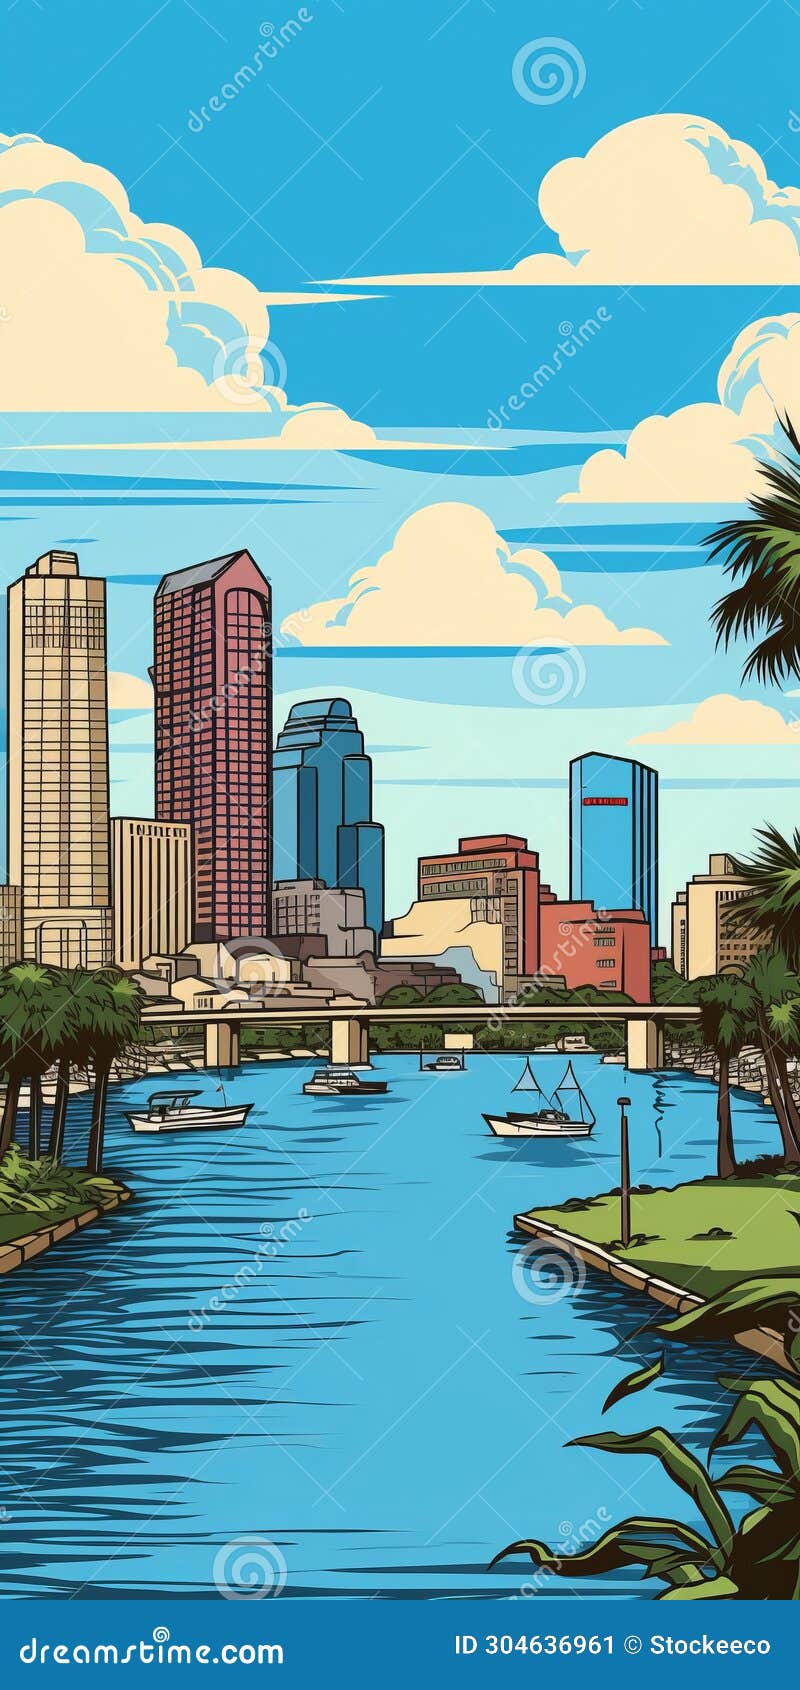 sarasota cityscape: vintage   in andy singer's style